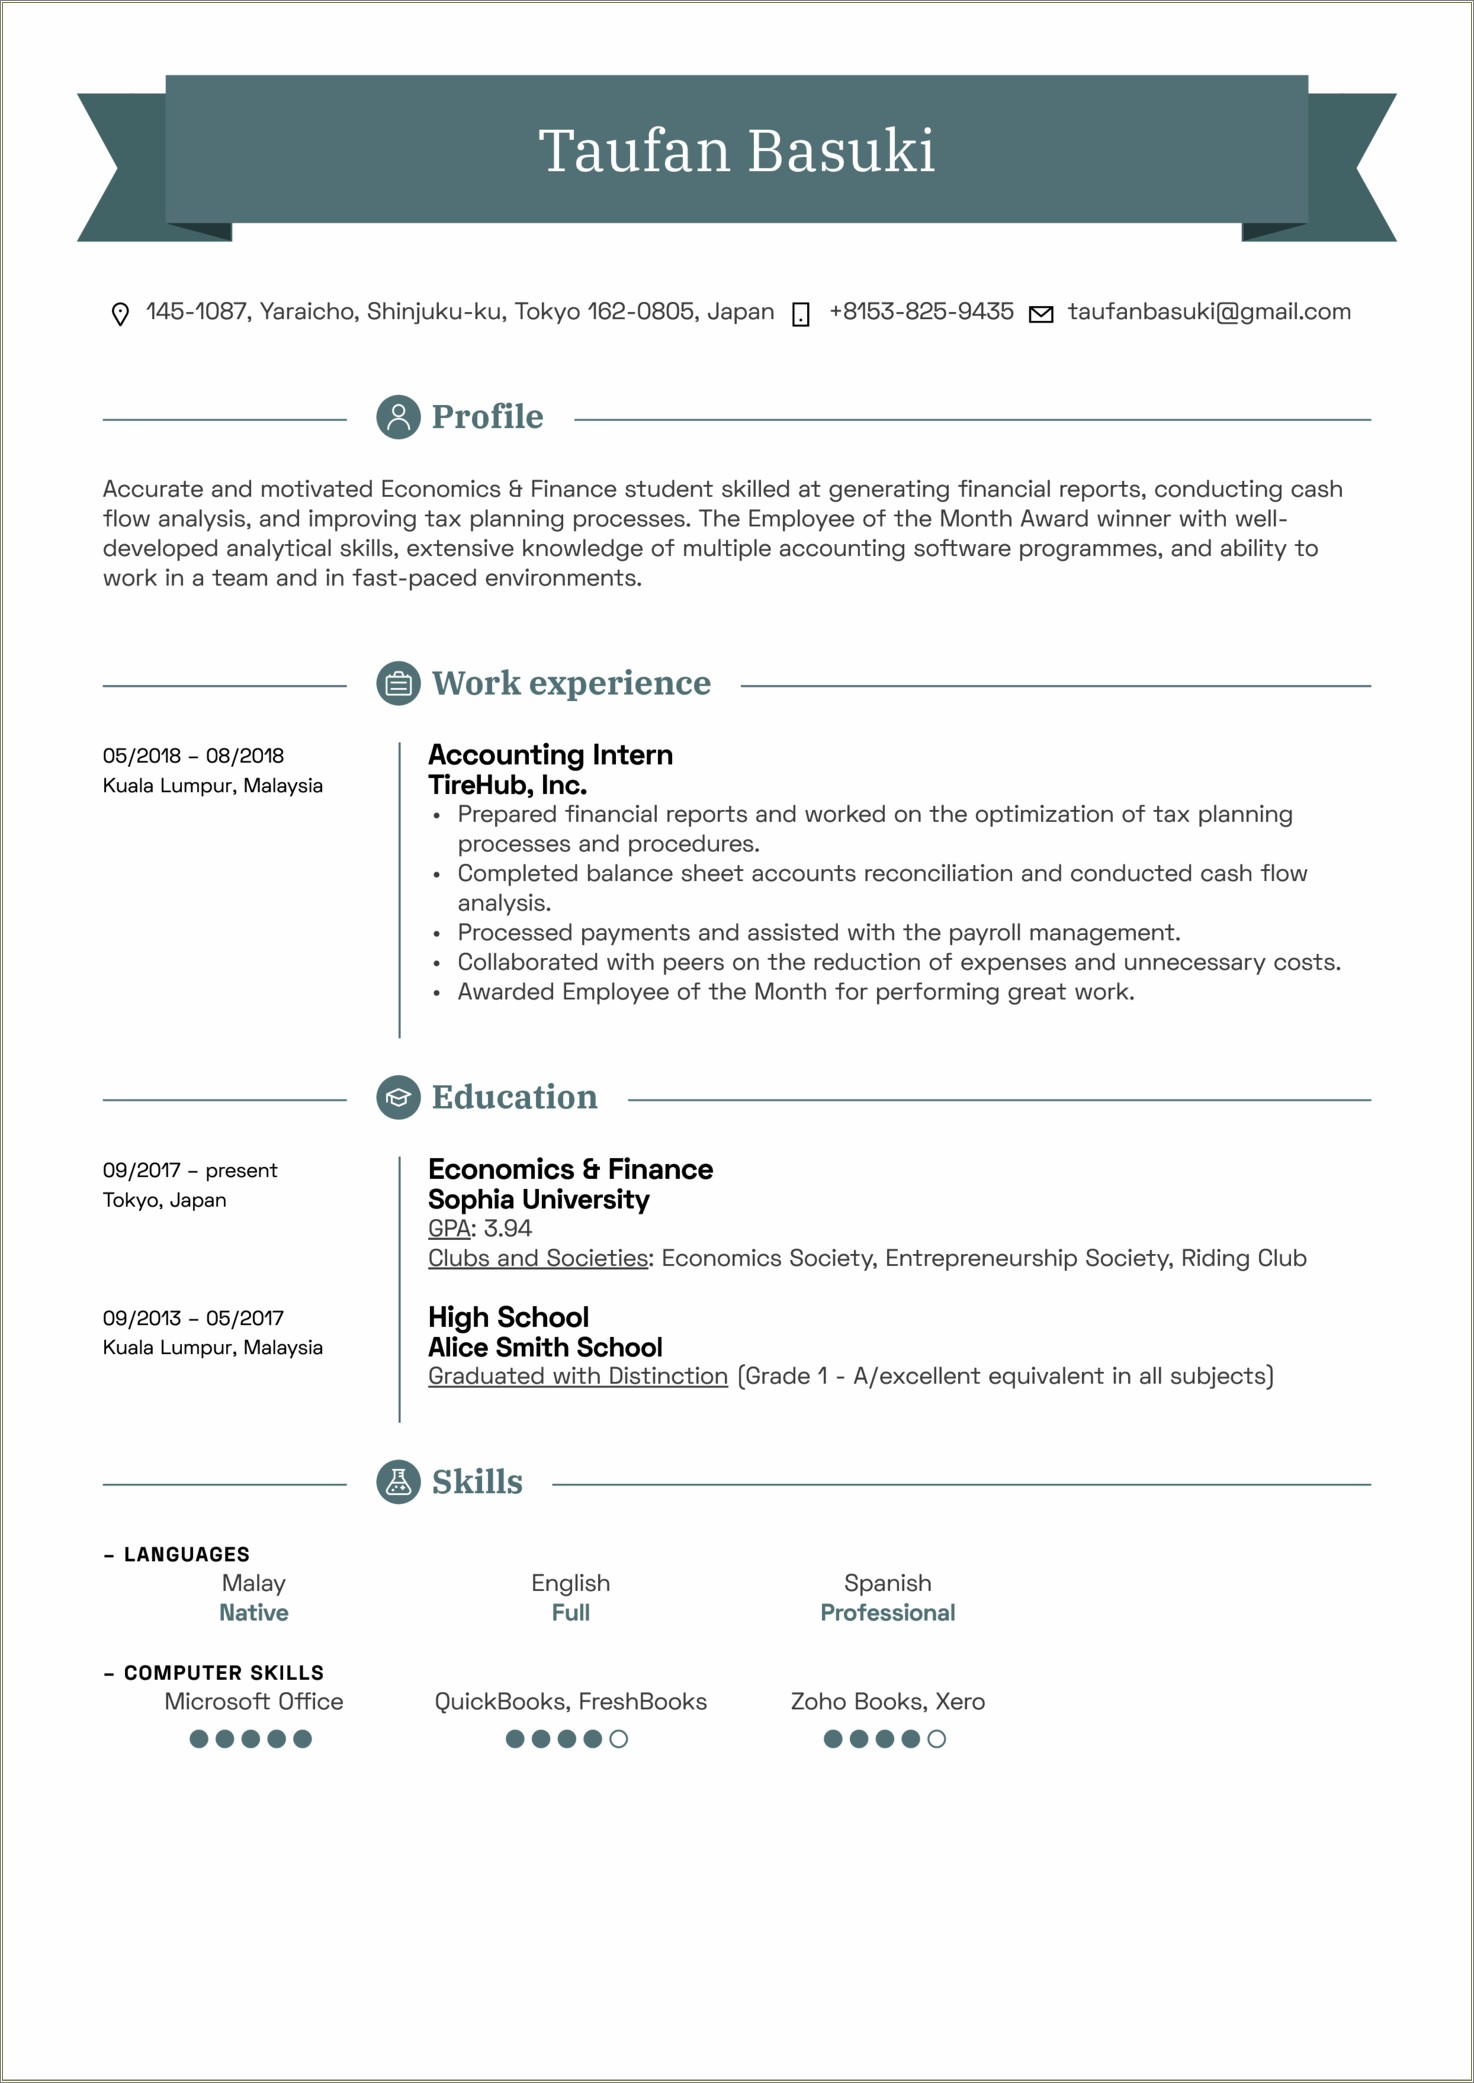 Resume Samples In Finance And Accounting